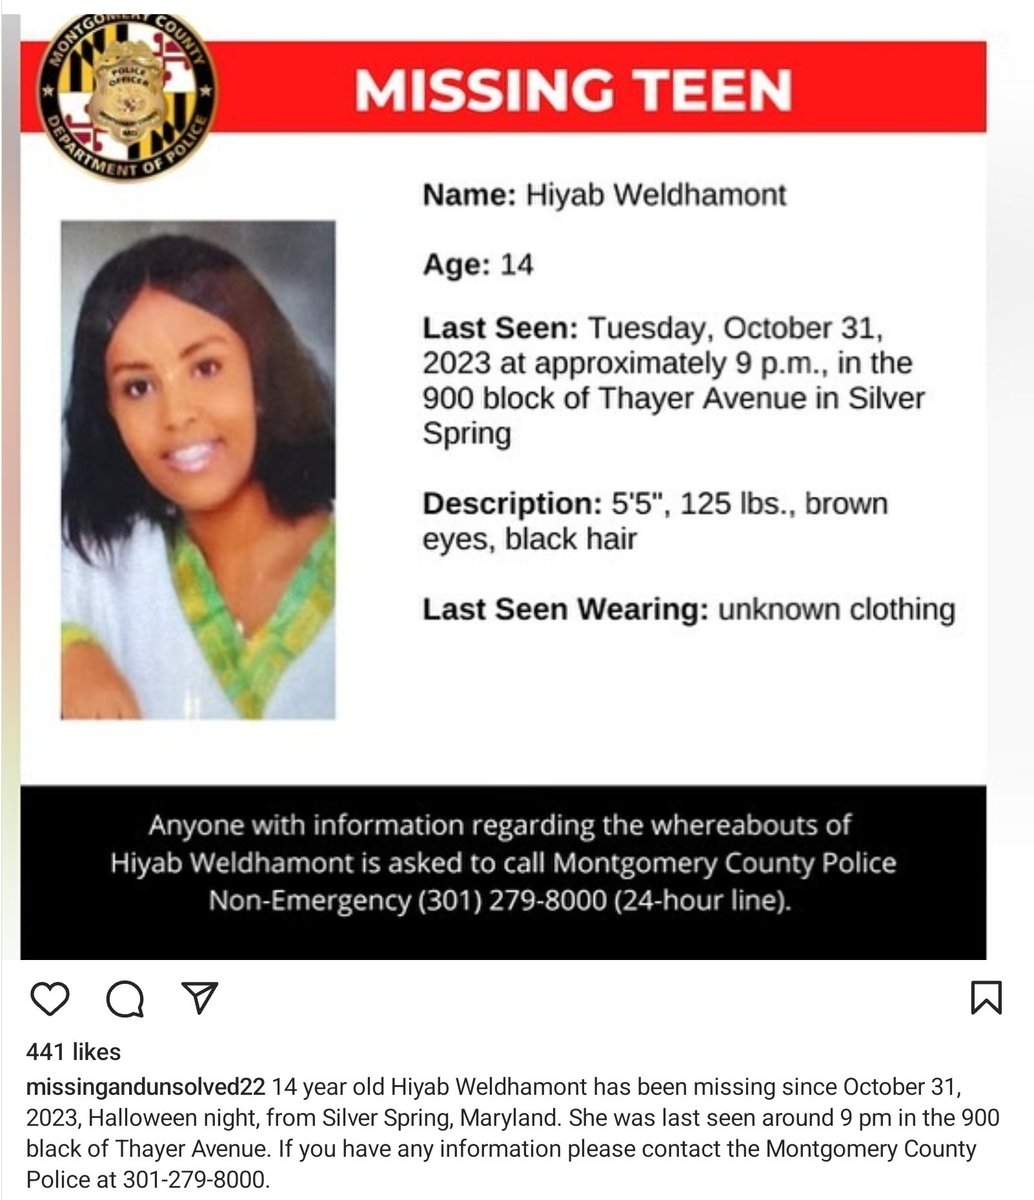 #HiyabWeldhamont #MissingTeen last seen 10/31/2023 from #SilverSpring #Maryland. She is 14 and is 5'5, 125 lbs, has black hair, and brown eyes.

If you have any information, please contact the Montgomery County Police # 301-279-8000